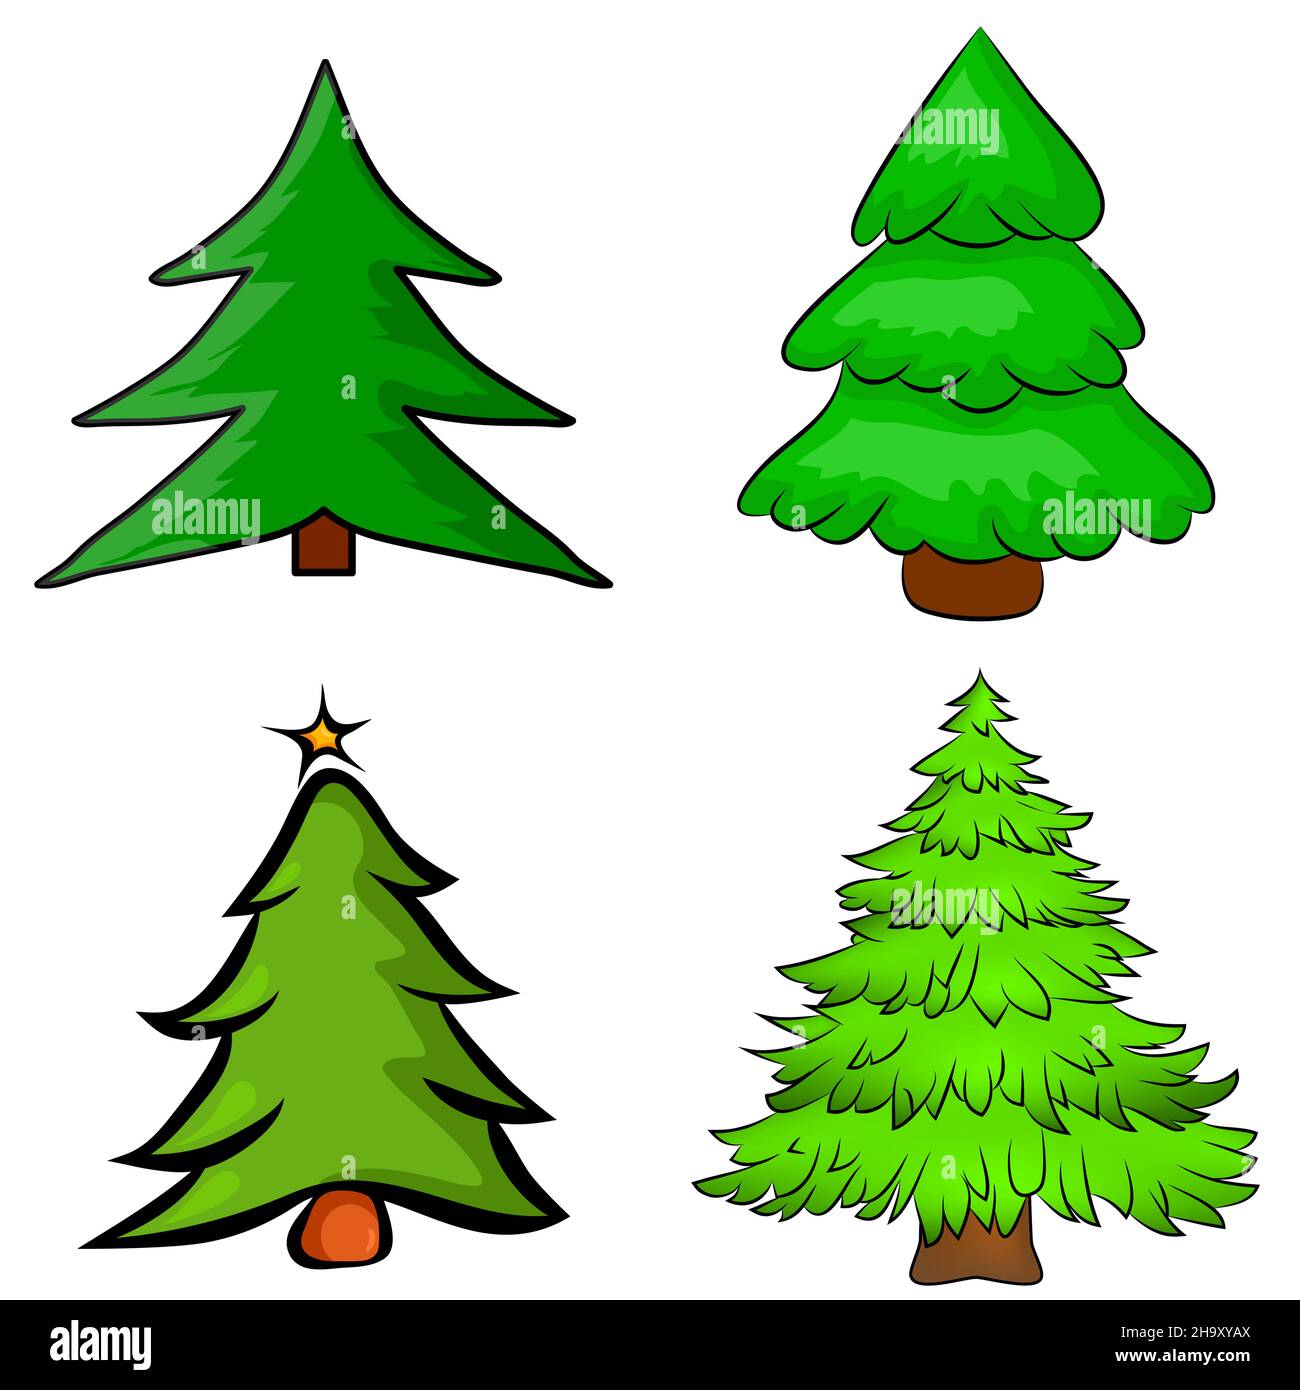 Christmas tree set, vector illustration. Can be used for greeting card, invitation, banner, web design. Stock Vector